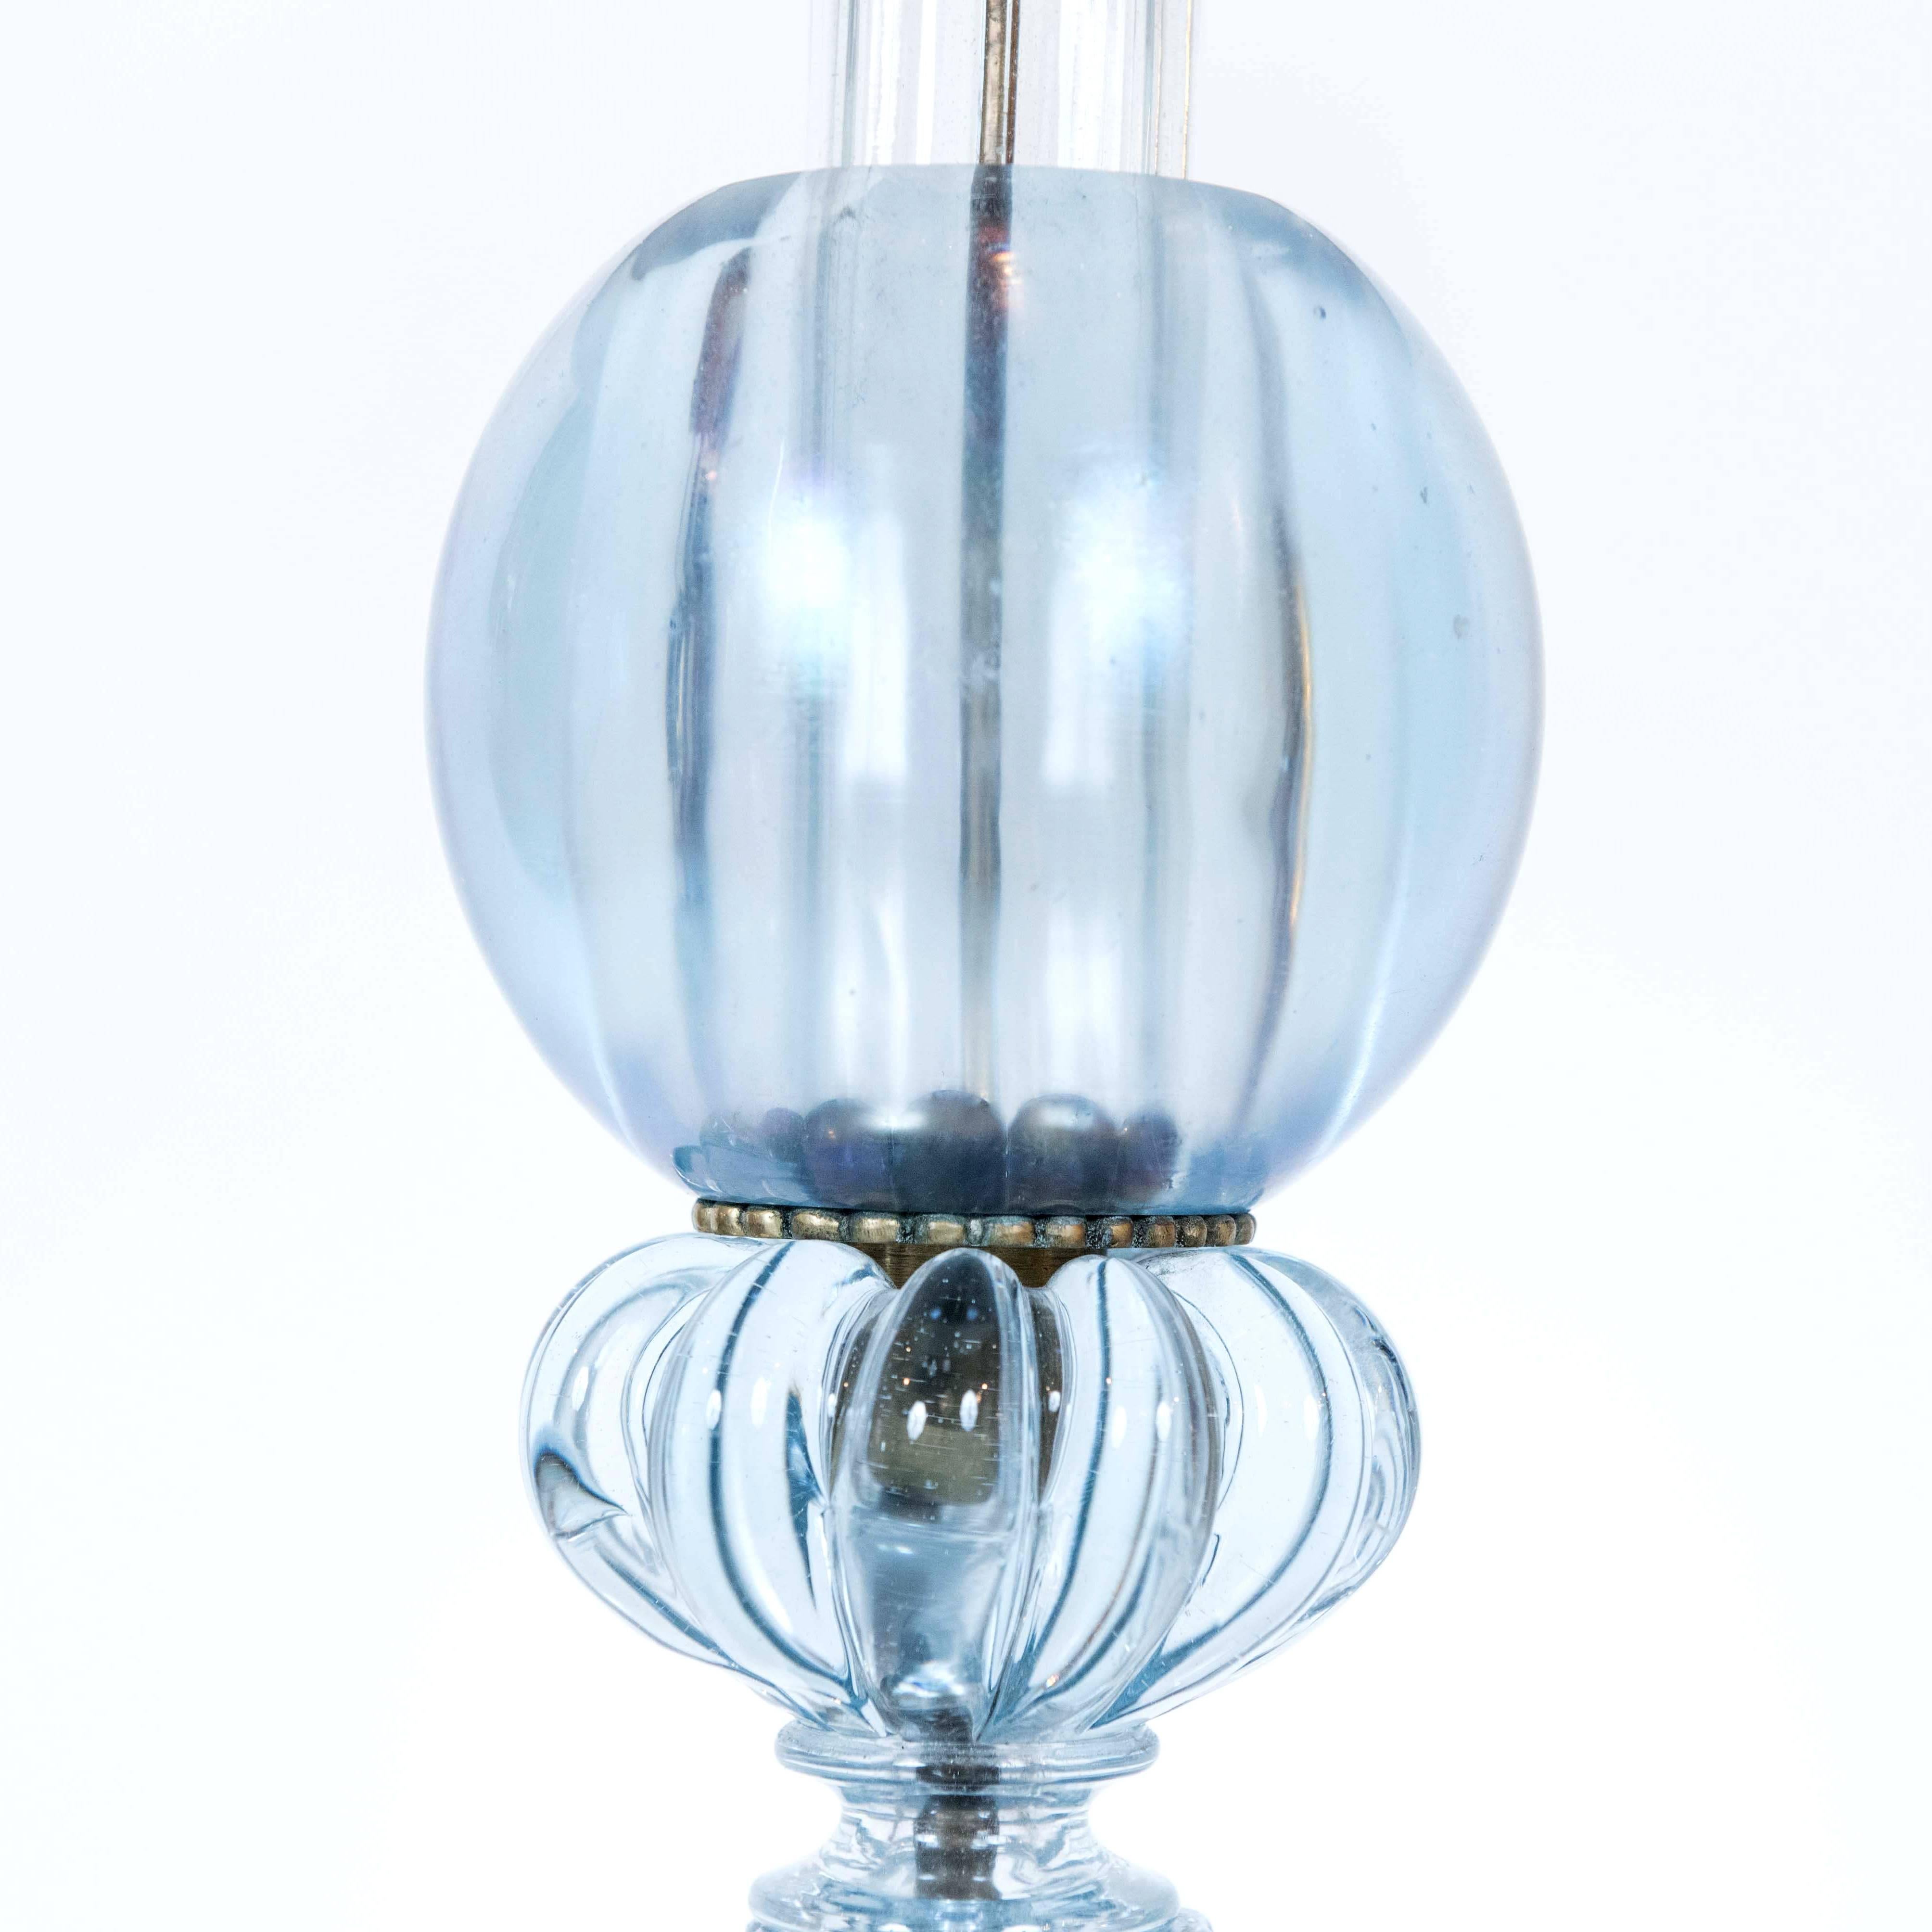 These translucent and unique blue Murano lamps are stunning with their matching glass base and large glass ball decoration. The overall height with shade is 28.5